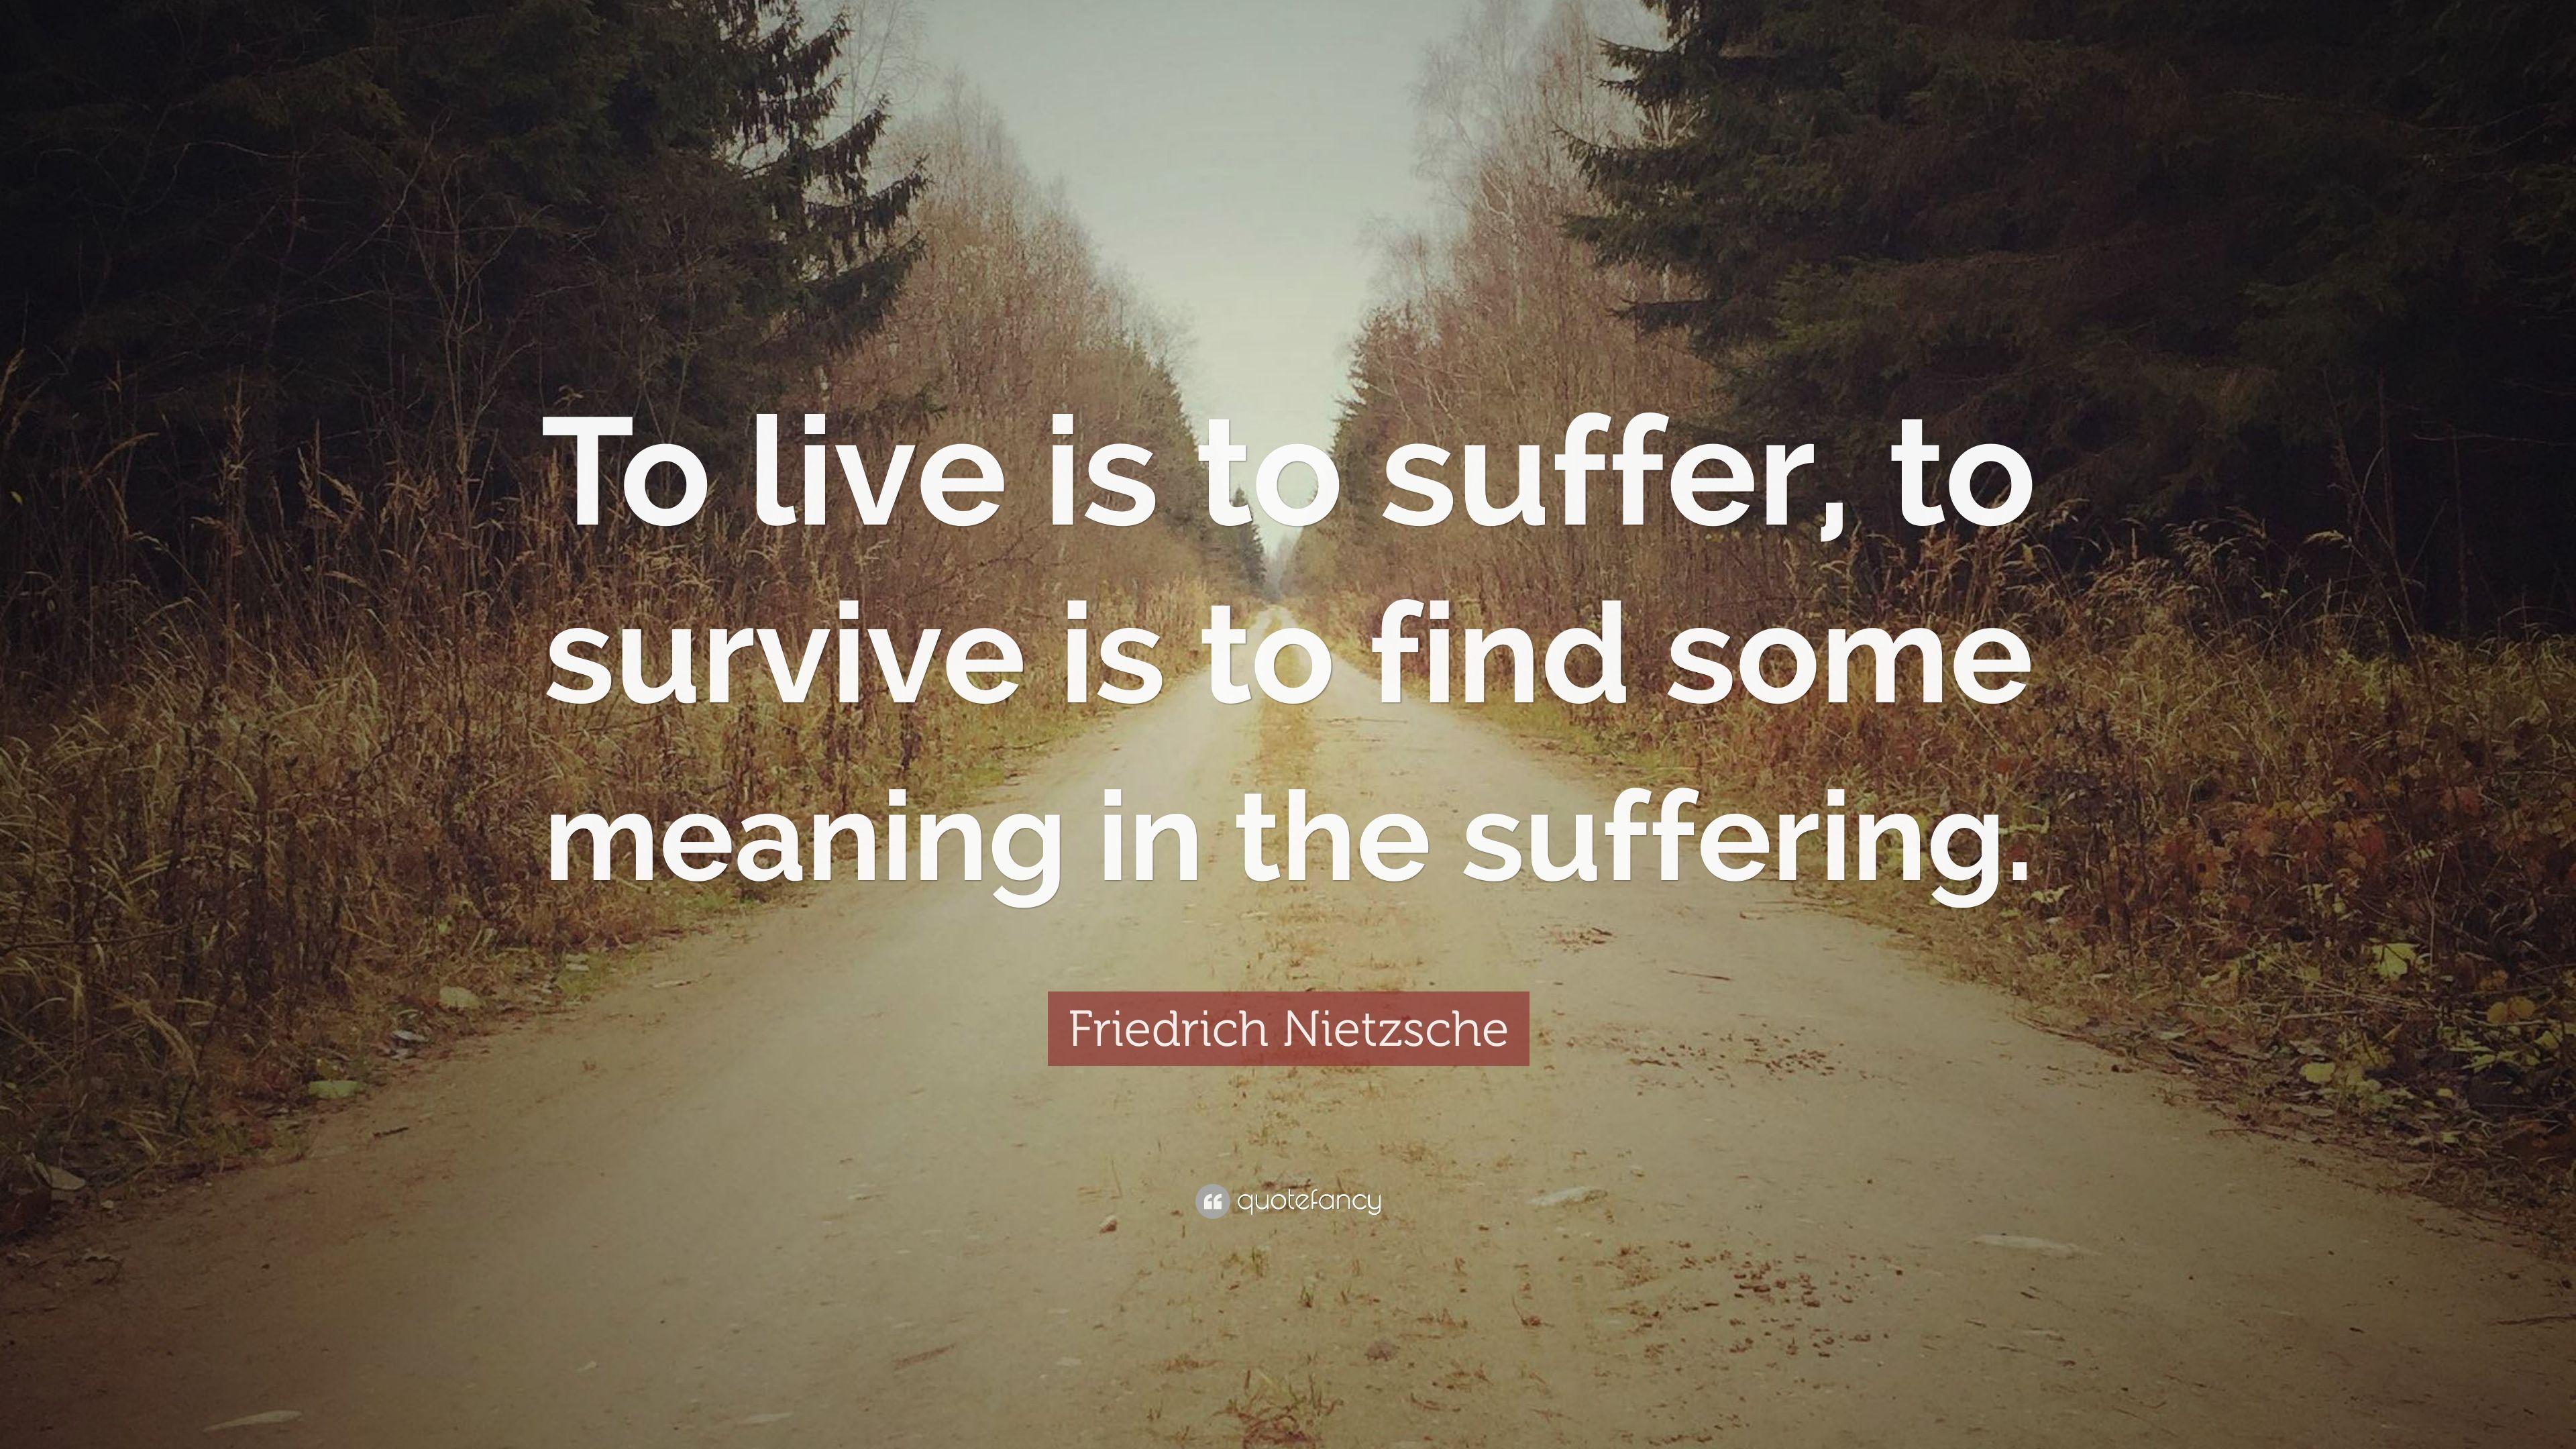 Friedrich Nietzsche Quote: “To live is to suffer, to survive is to